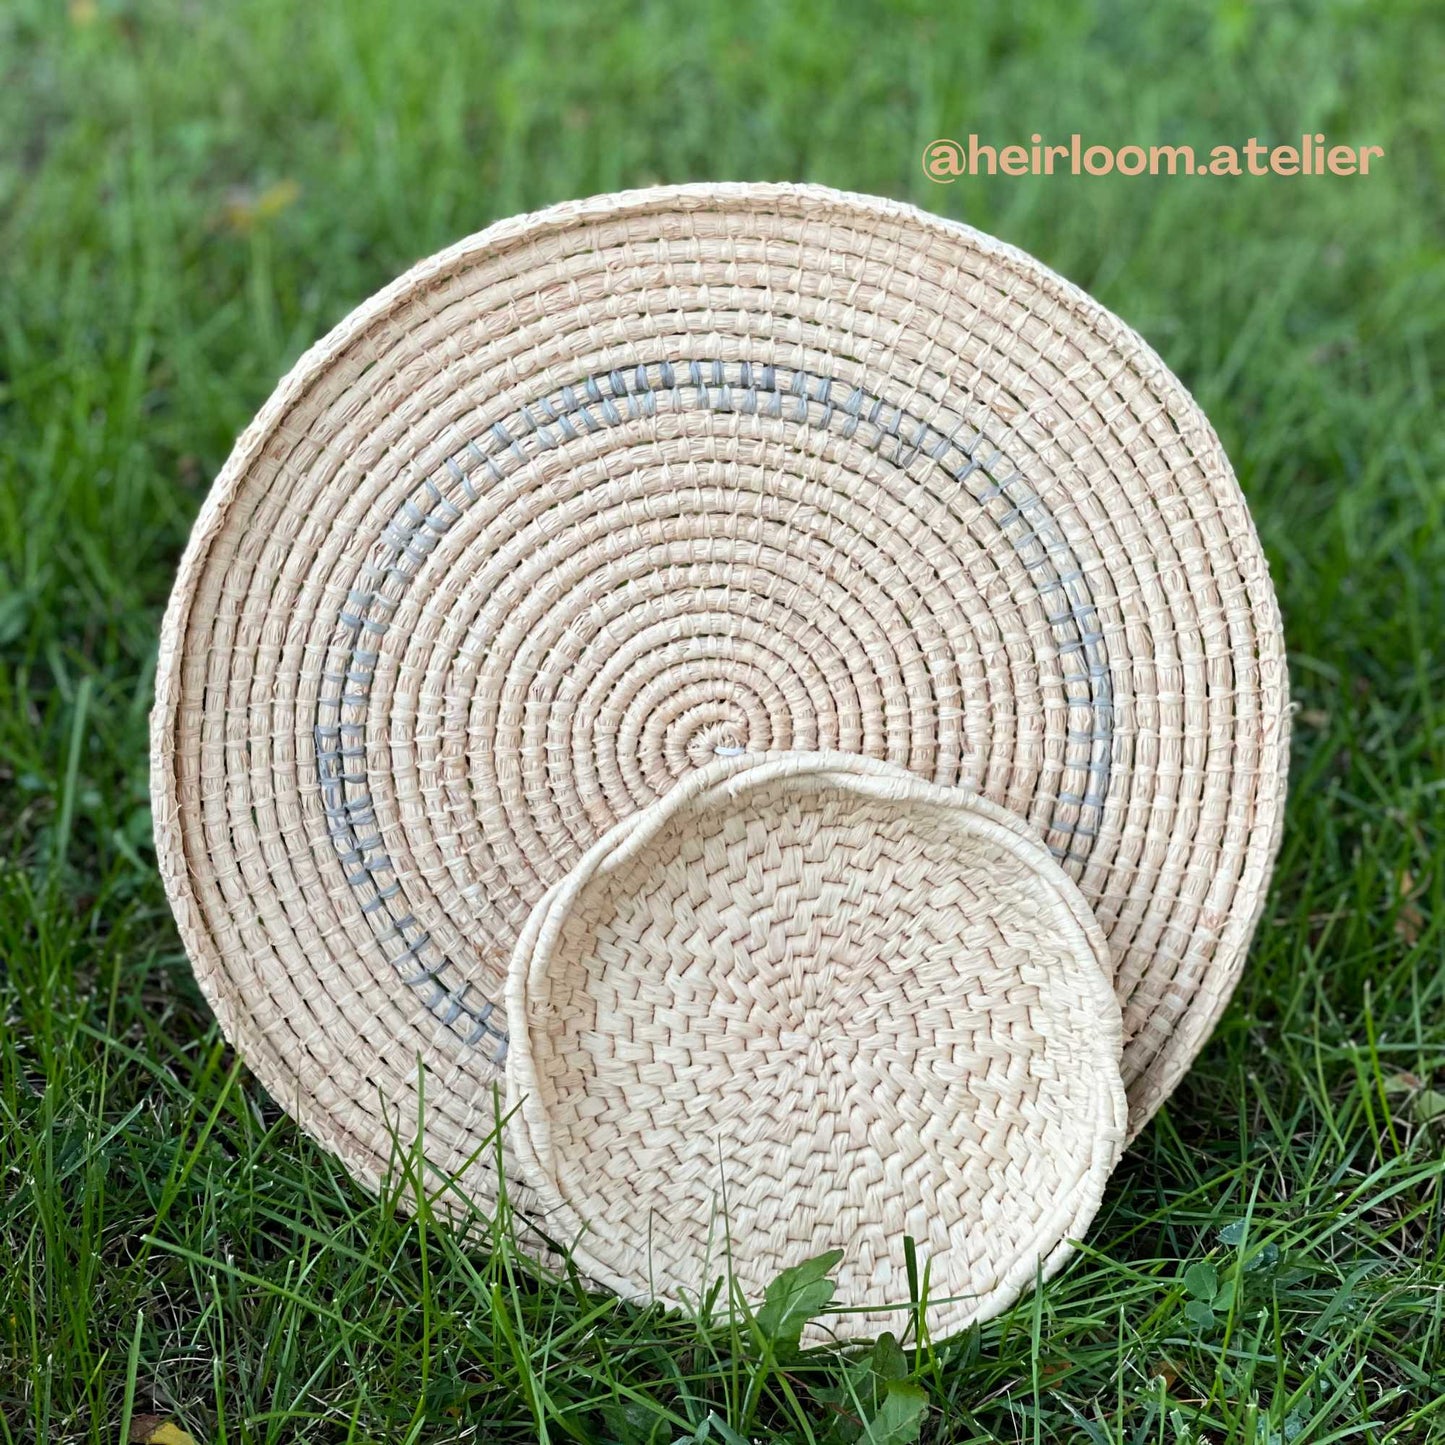 
                  
                    Raffia platter and basked crafted using Nutscene raffia in natural by @heirloom.atelier
                  
                